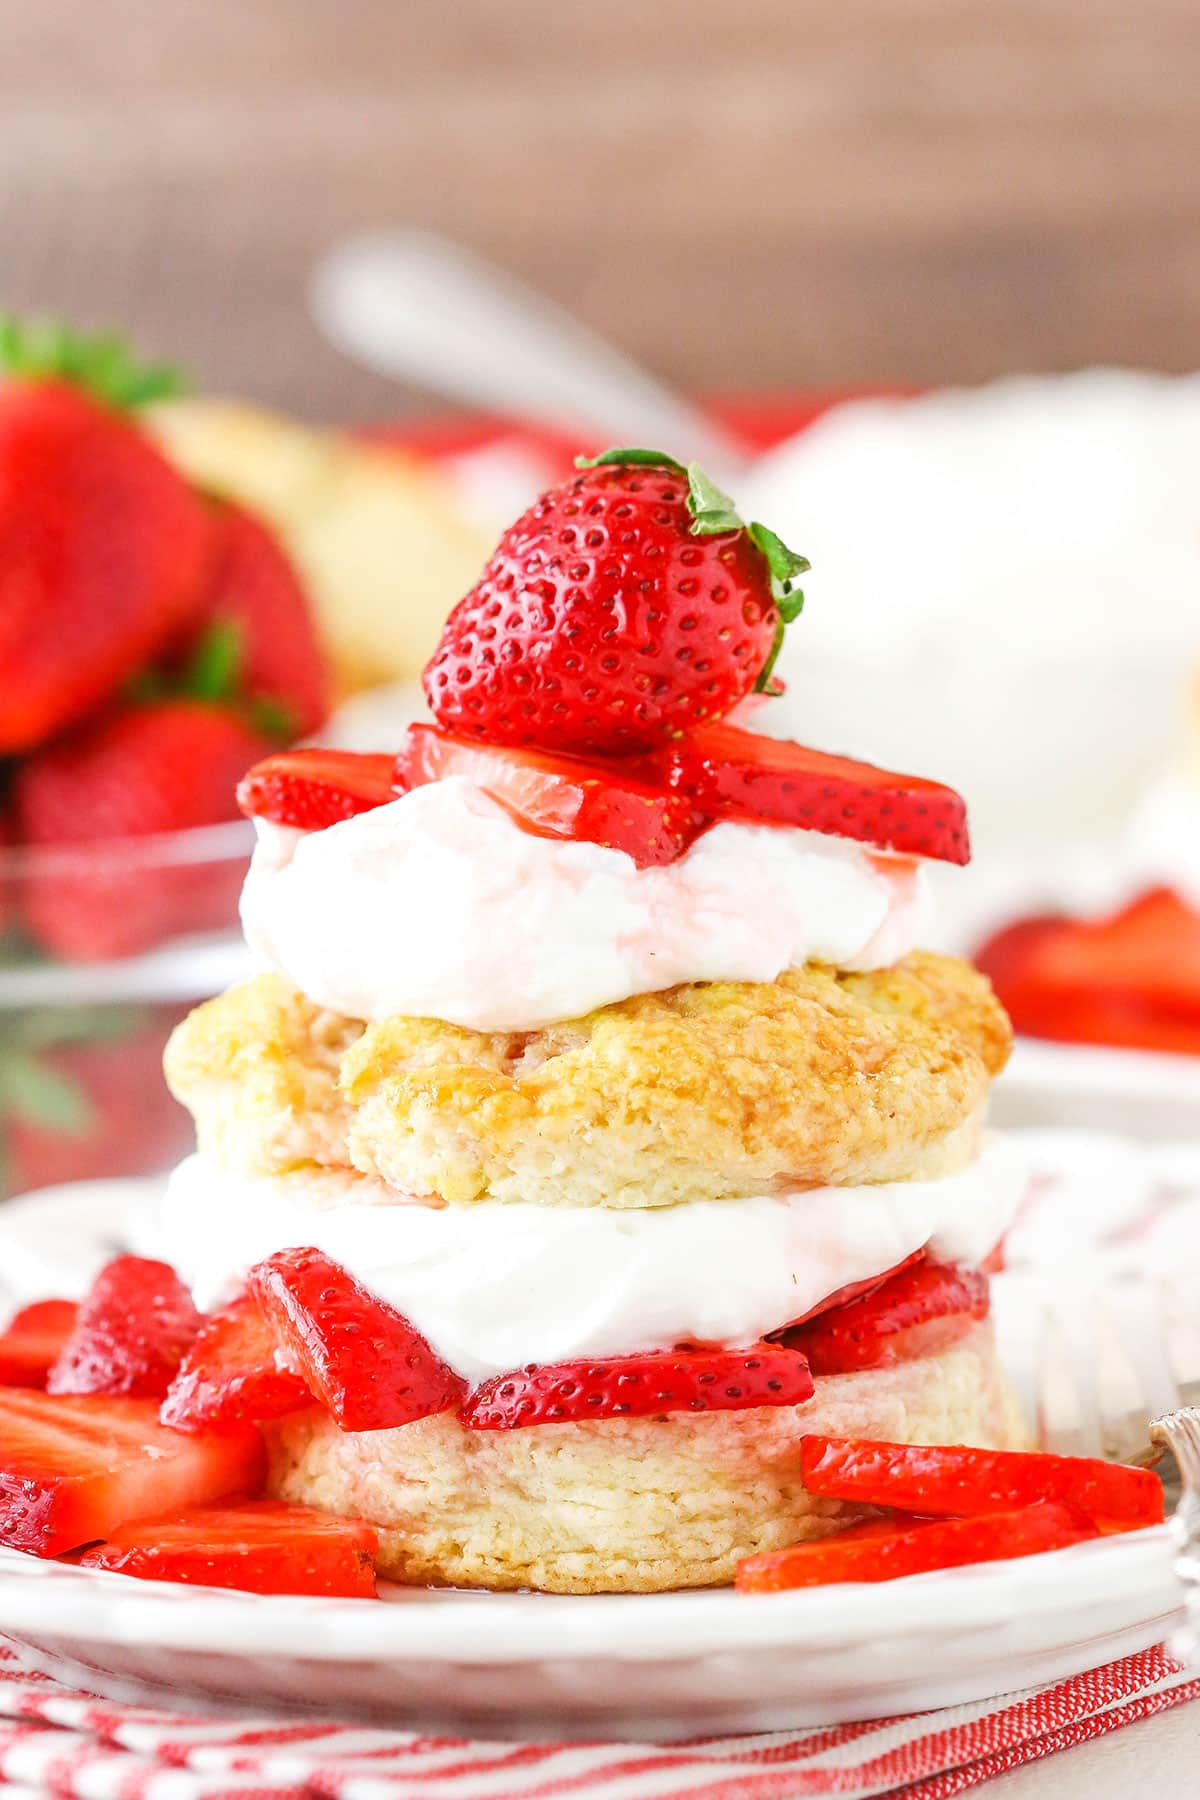 Classic strawberry shortcake with sliced strawberries on top.